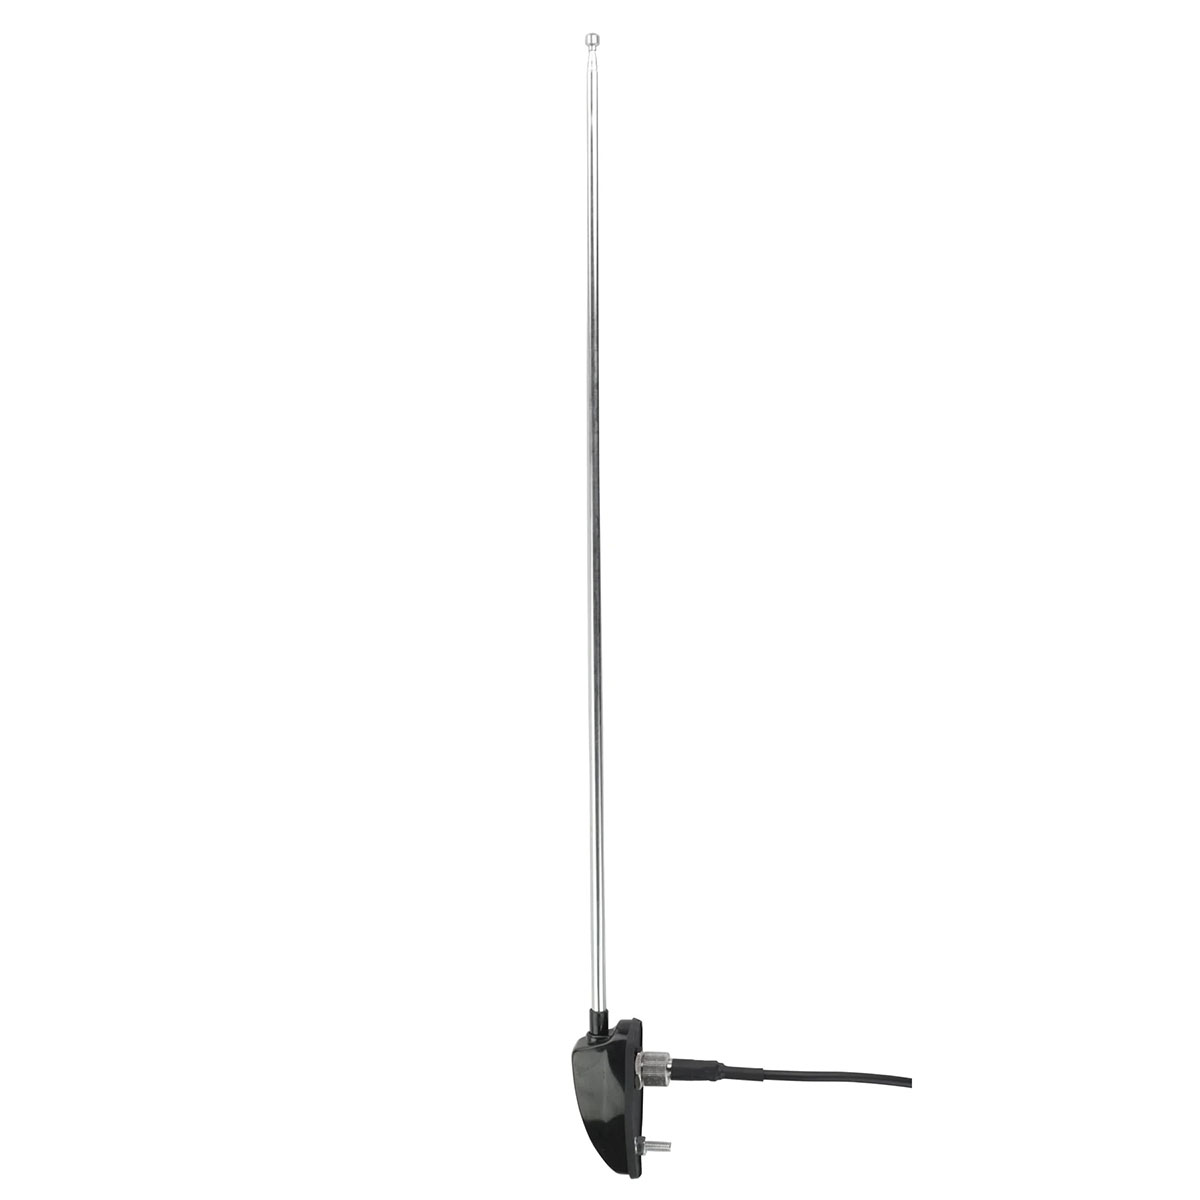 1952-1977 Beetle and 1956-1973 VW Bus Replacement Antenna